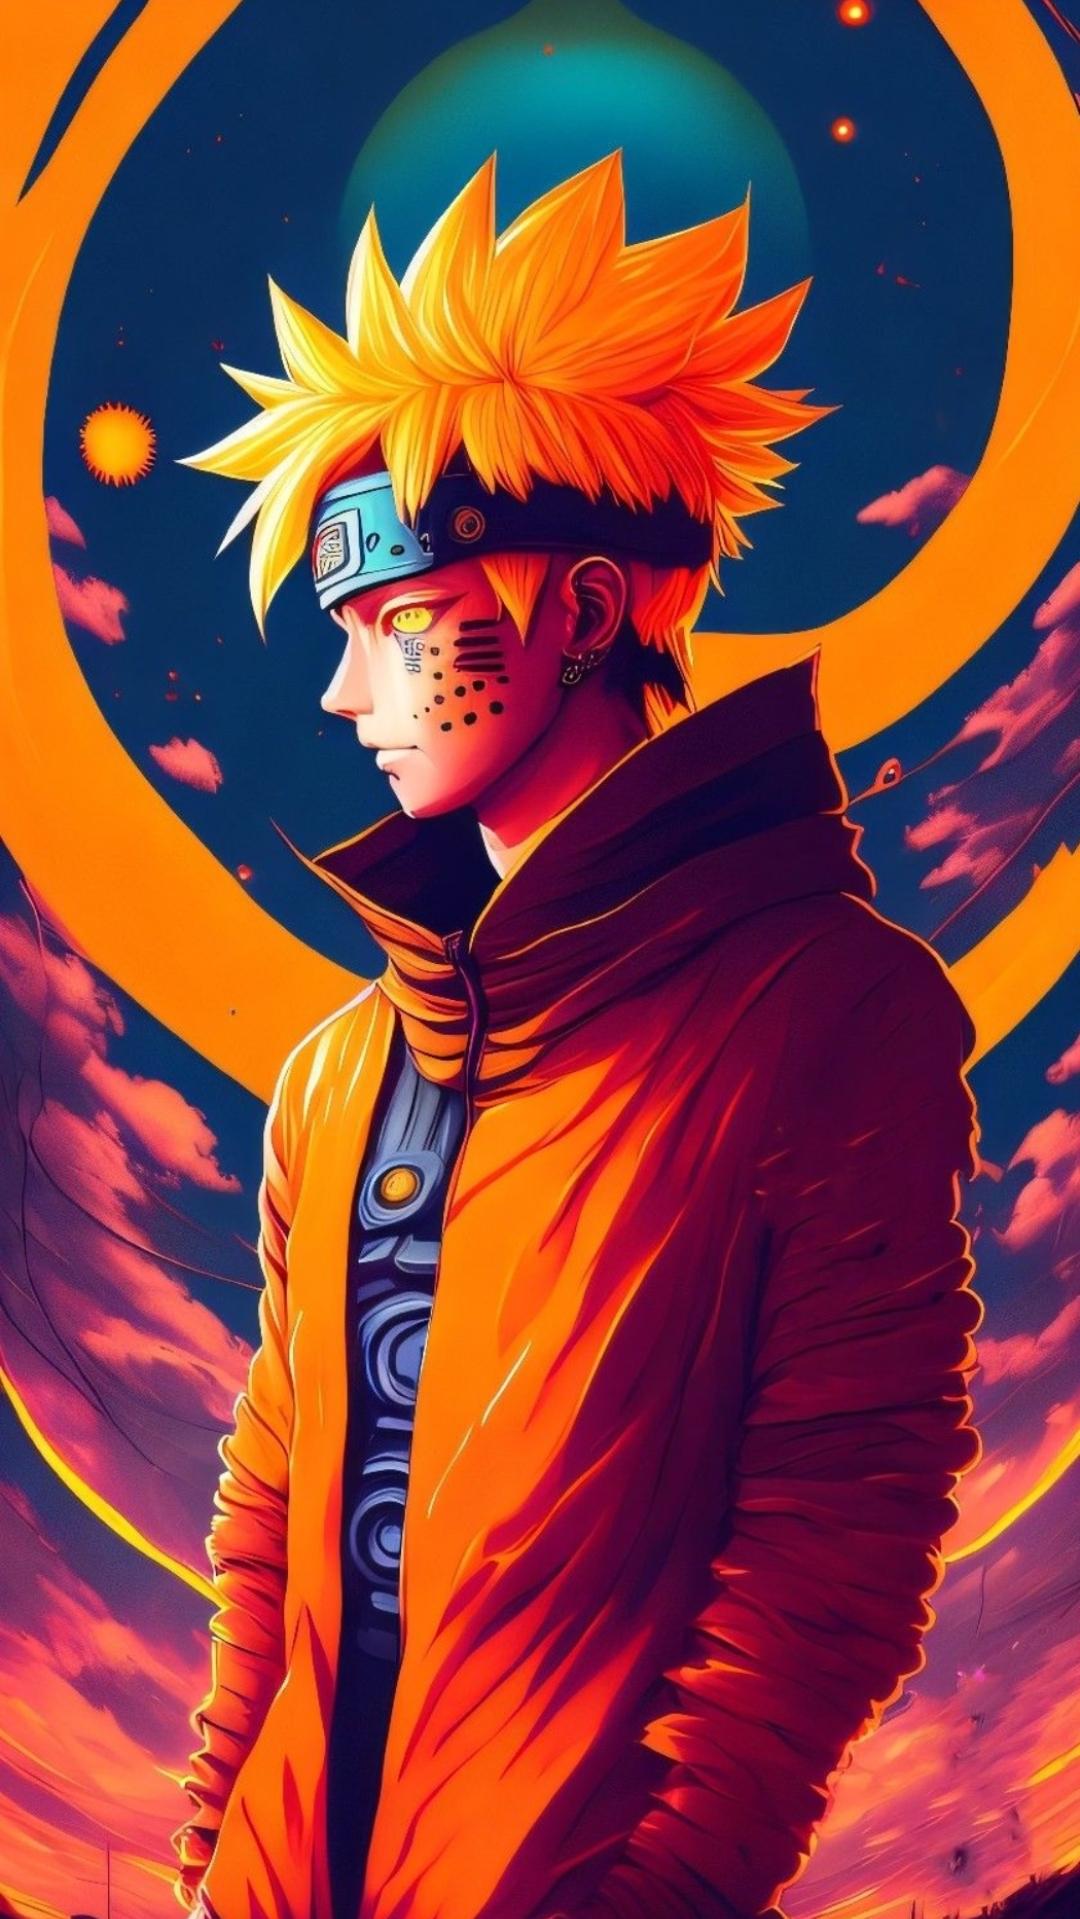 Naruto Wallpapers Top Best Naruto Wallpapers HQ